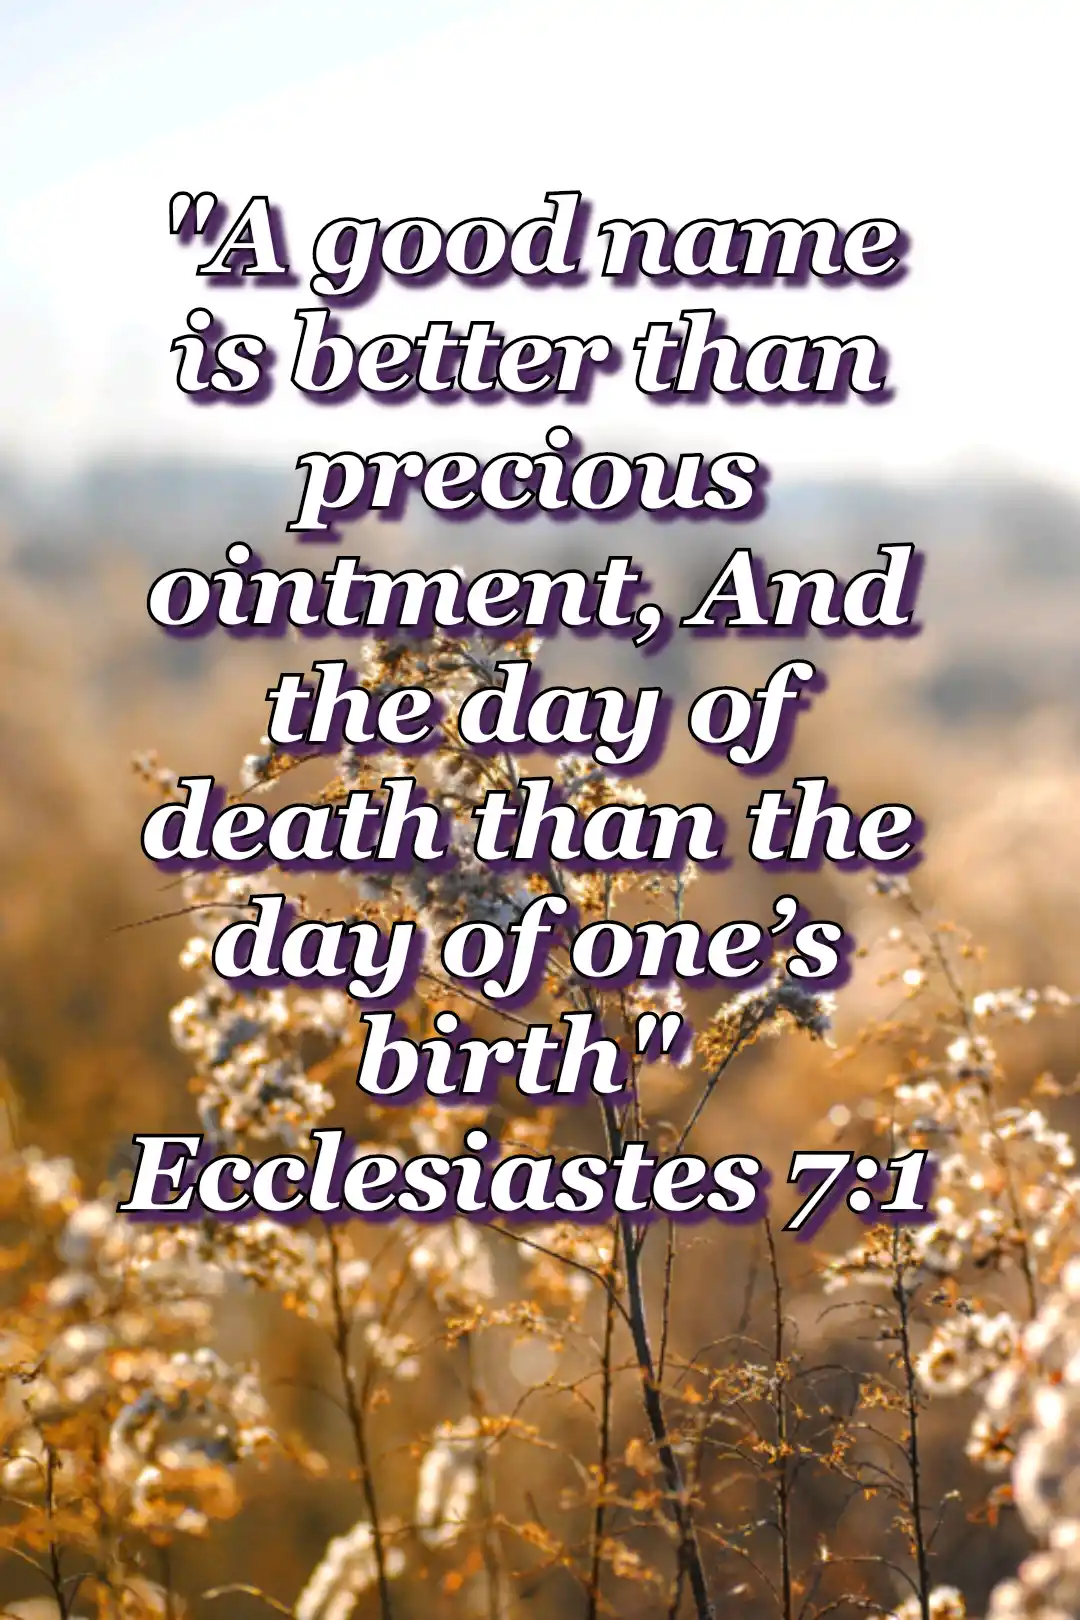 Bible-Verses_about_death-Image (Ecclesiastes 7:1)